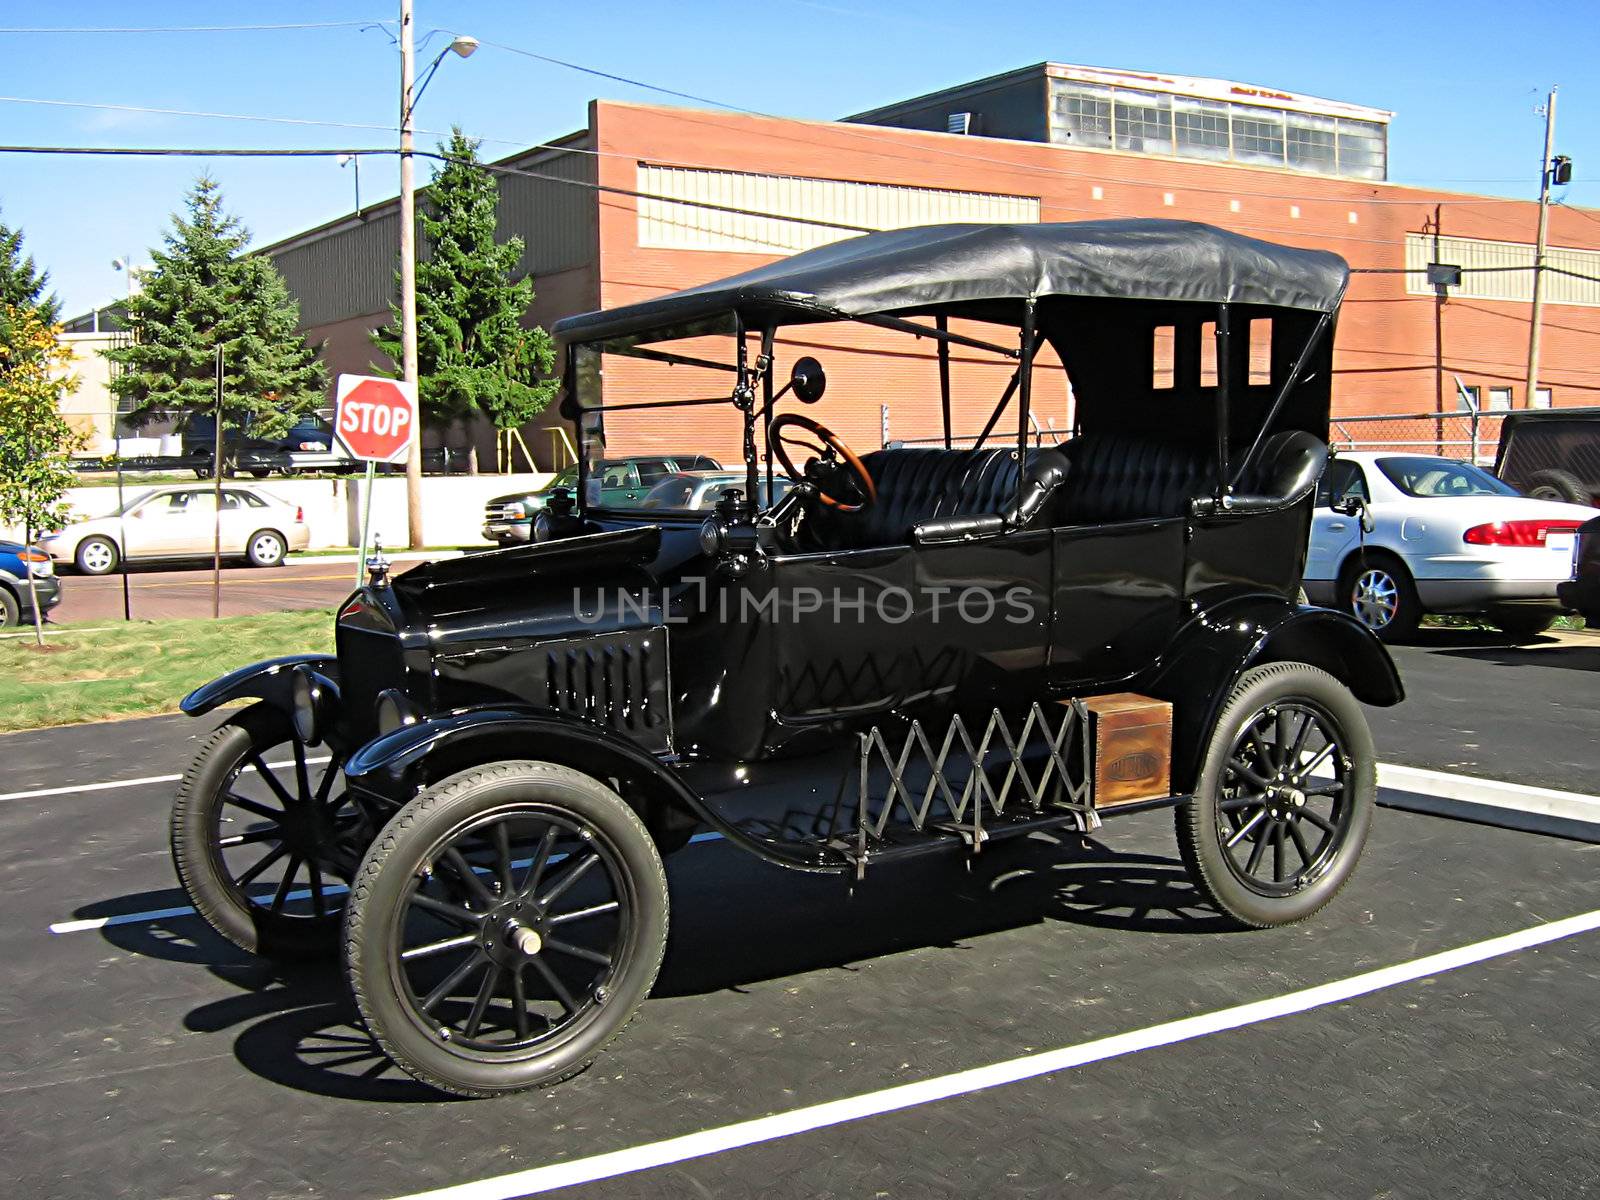 A photograph of an early 20th century American automobile.